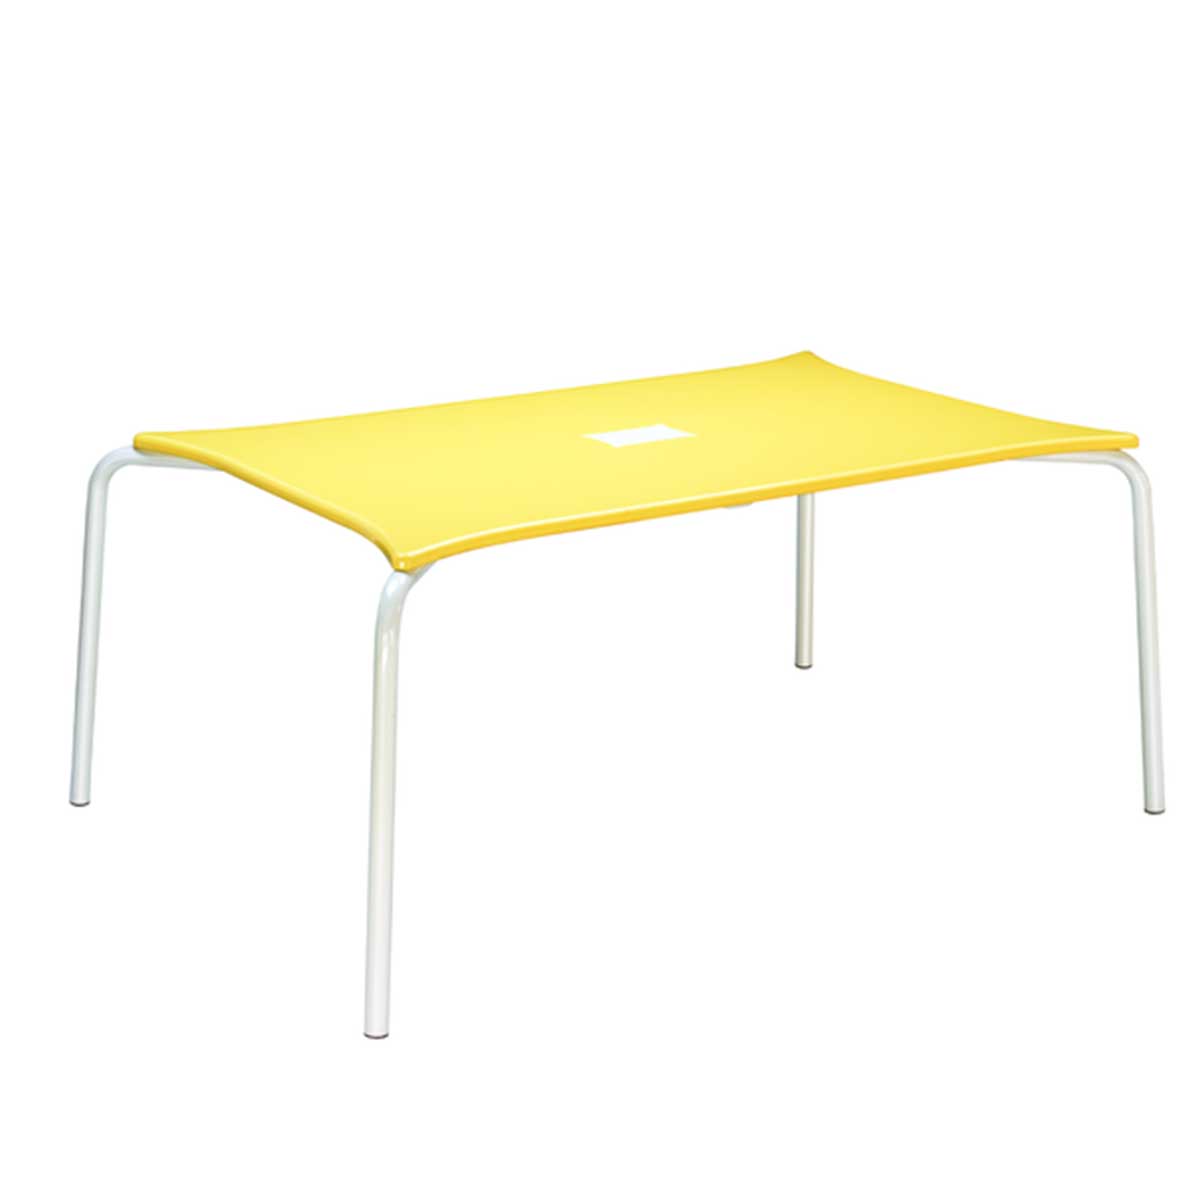 Cafeteria Table Manufacturers, Suppliers in Pushp Vihar